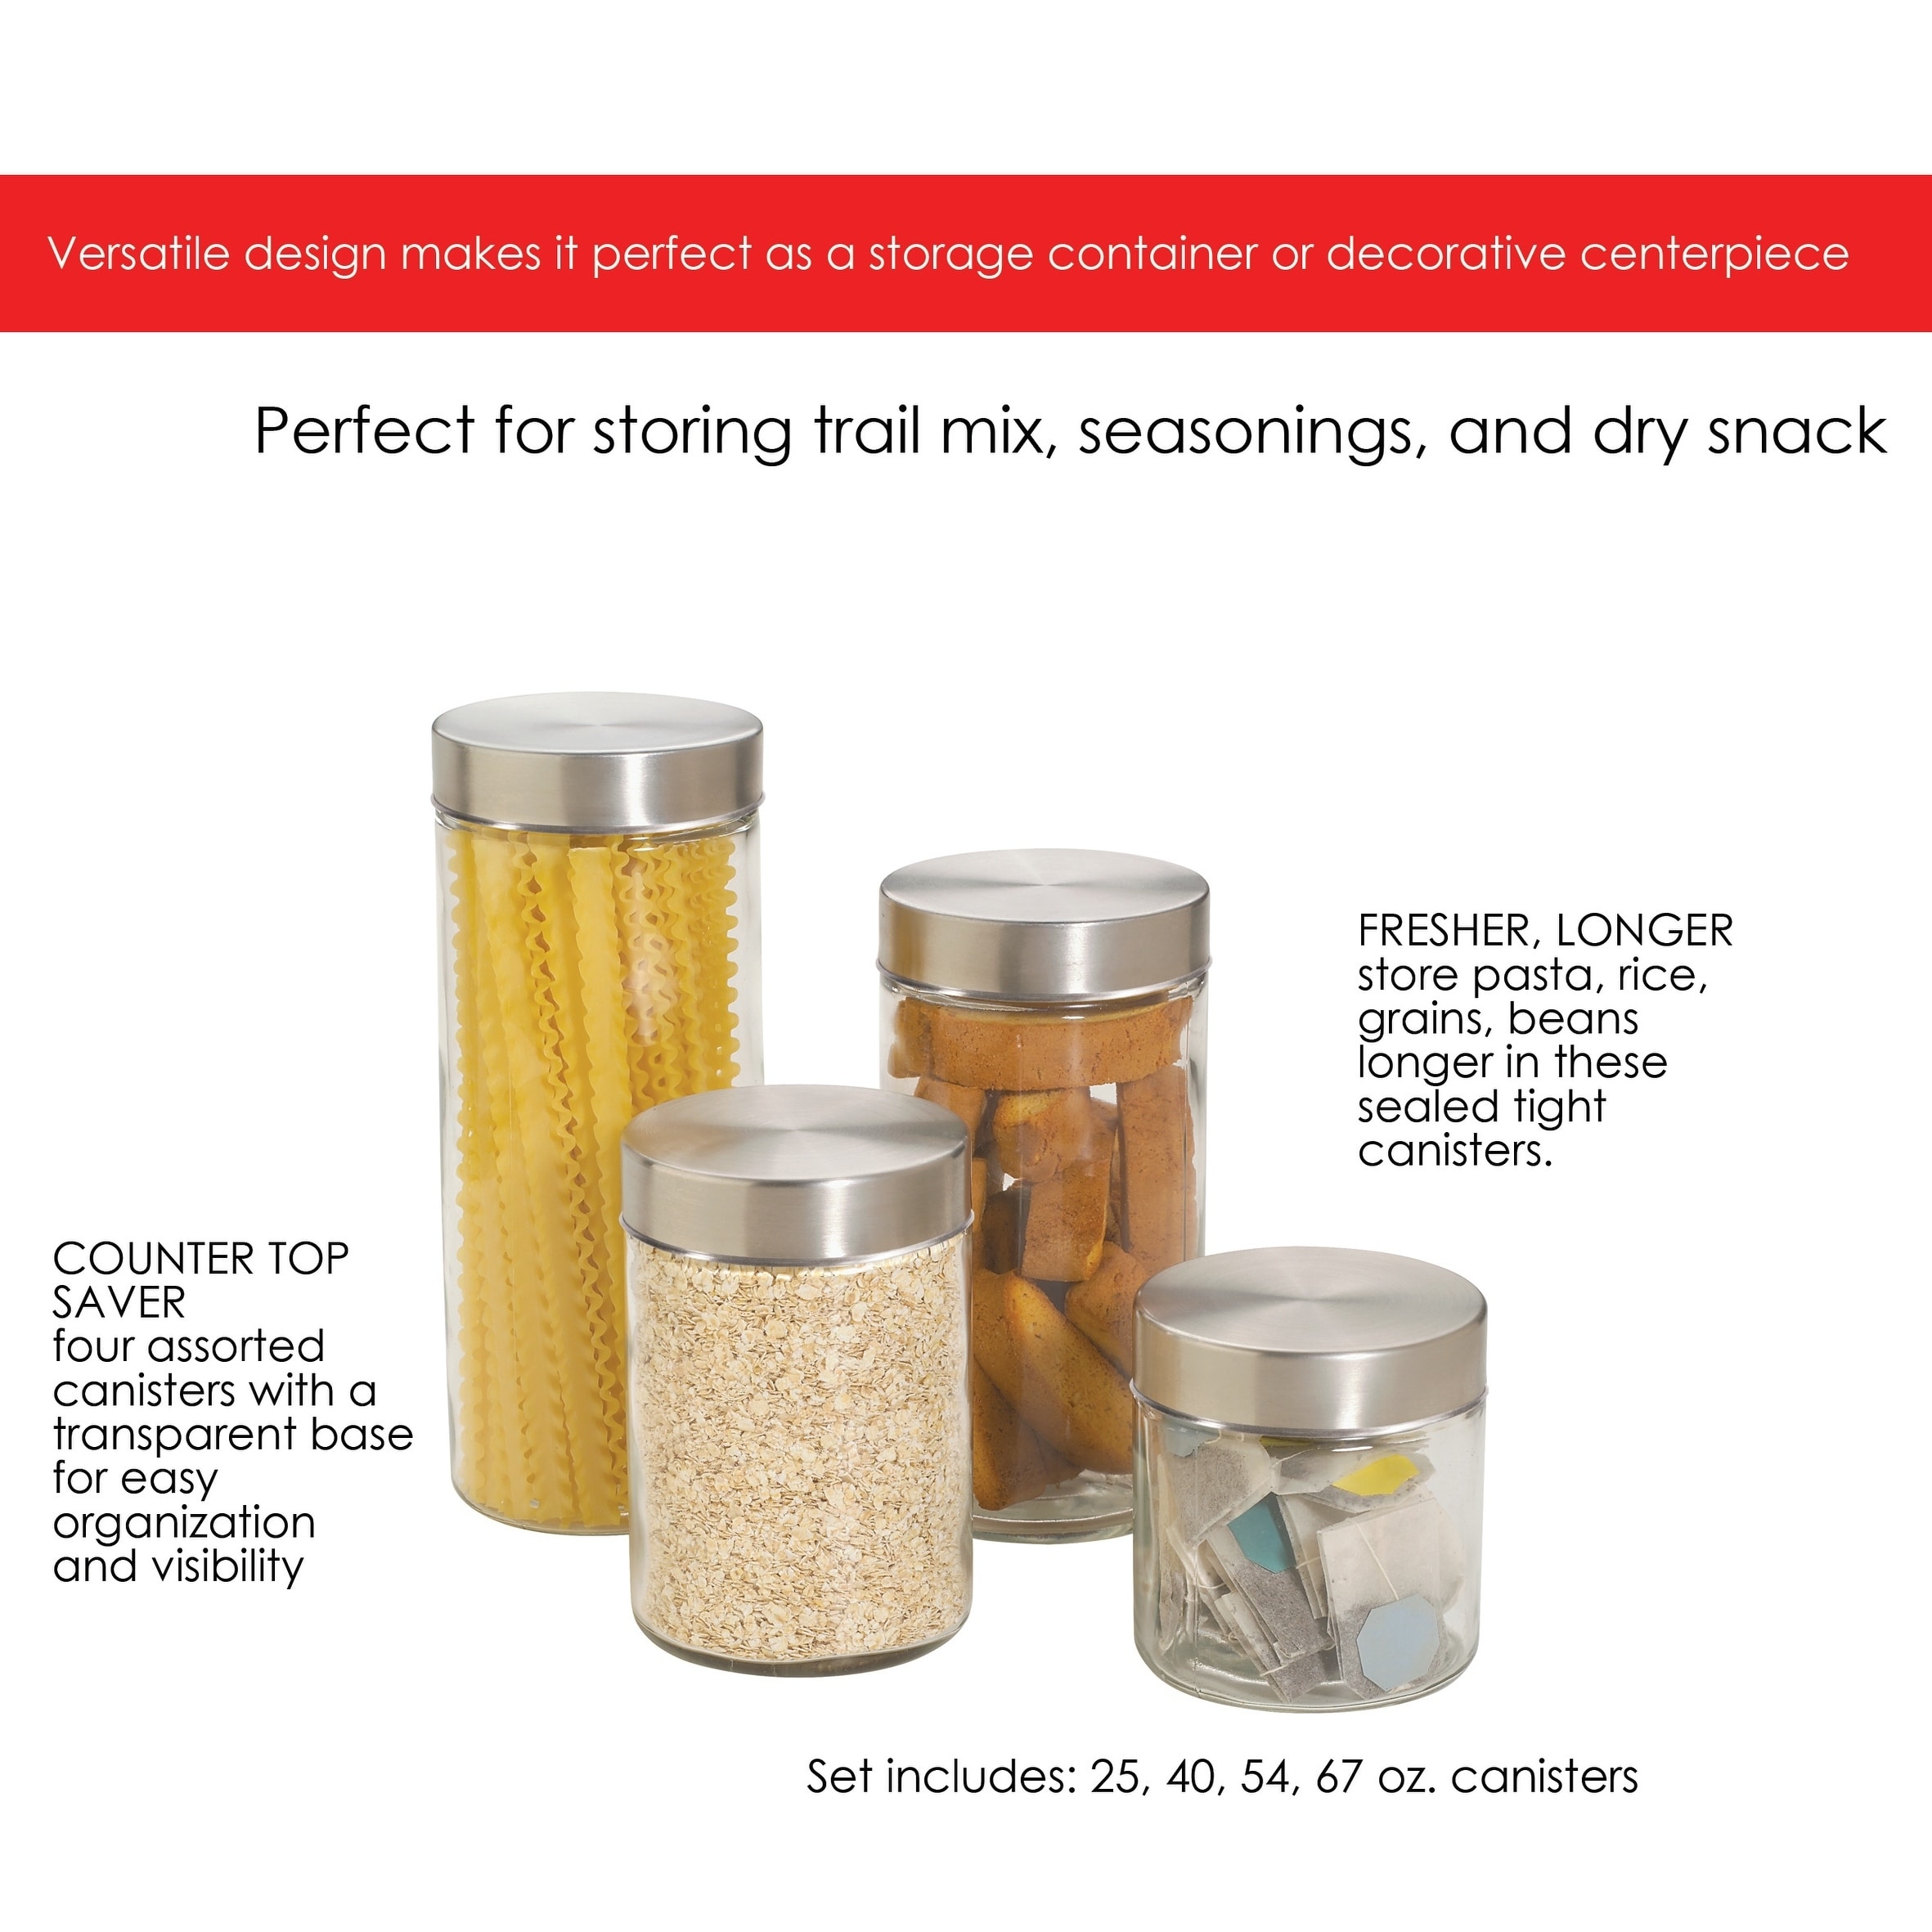 https://ak1.ostkcdn.com/images/products/11884050/Home-Basics-Clear-Glass-Canisters-with-Airtight-Lids-Pack-of-4-41312c5b-9a4c-4fb9-82b3-efa31b083c06.jpg